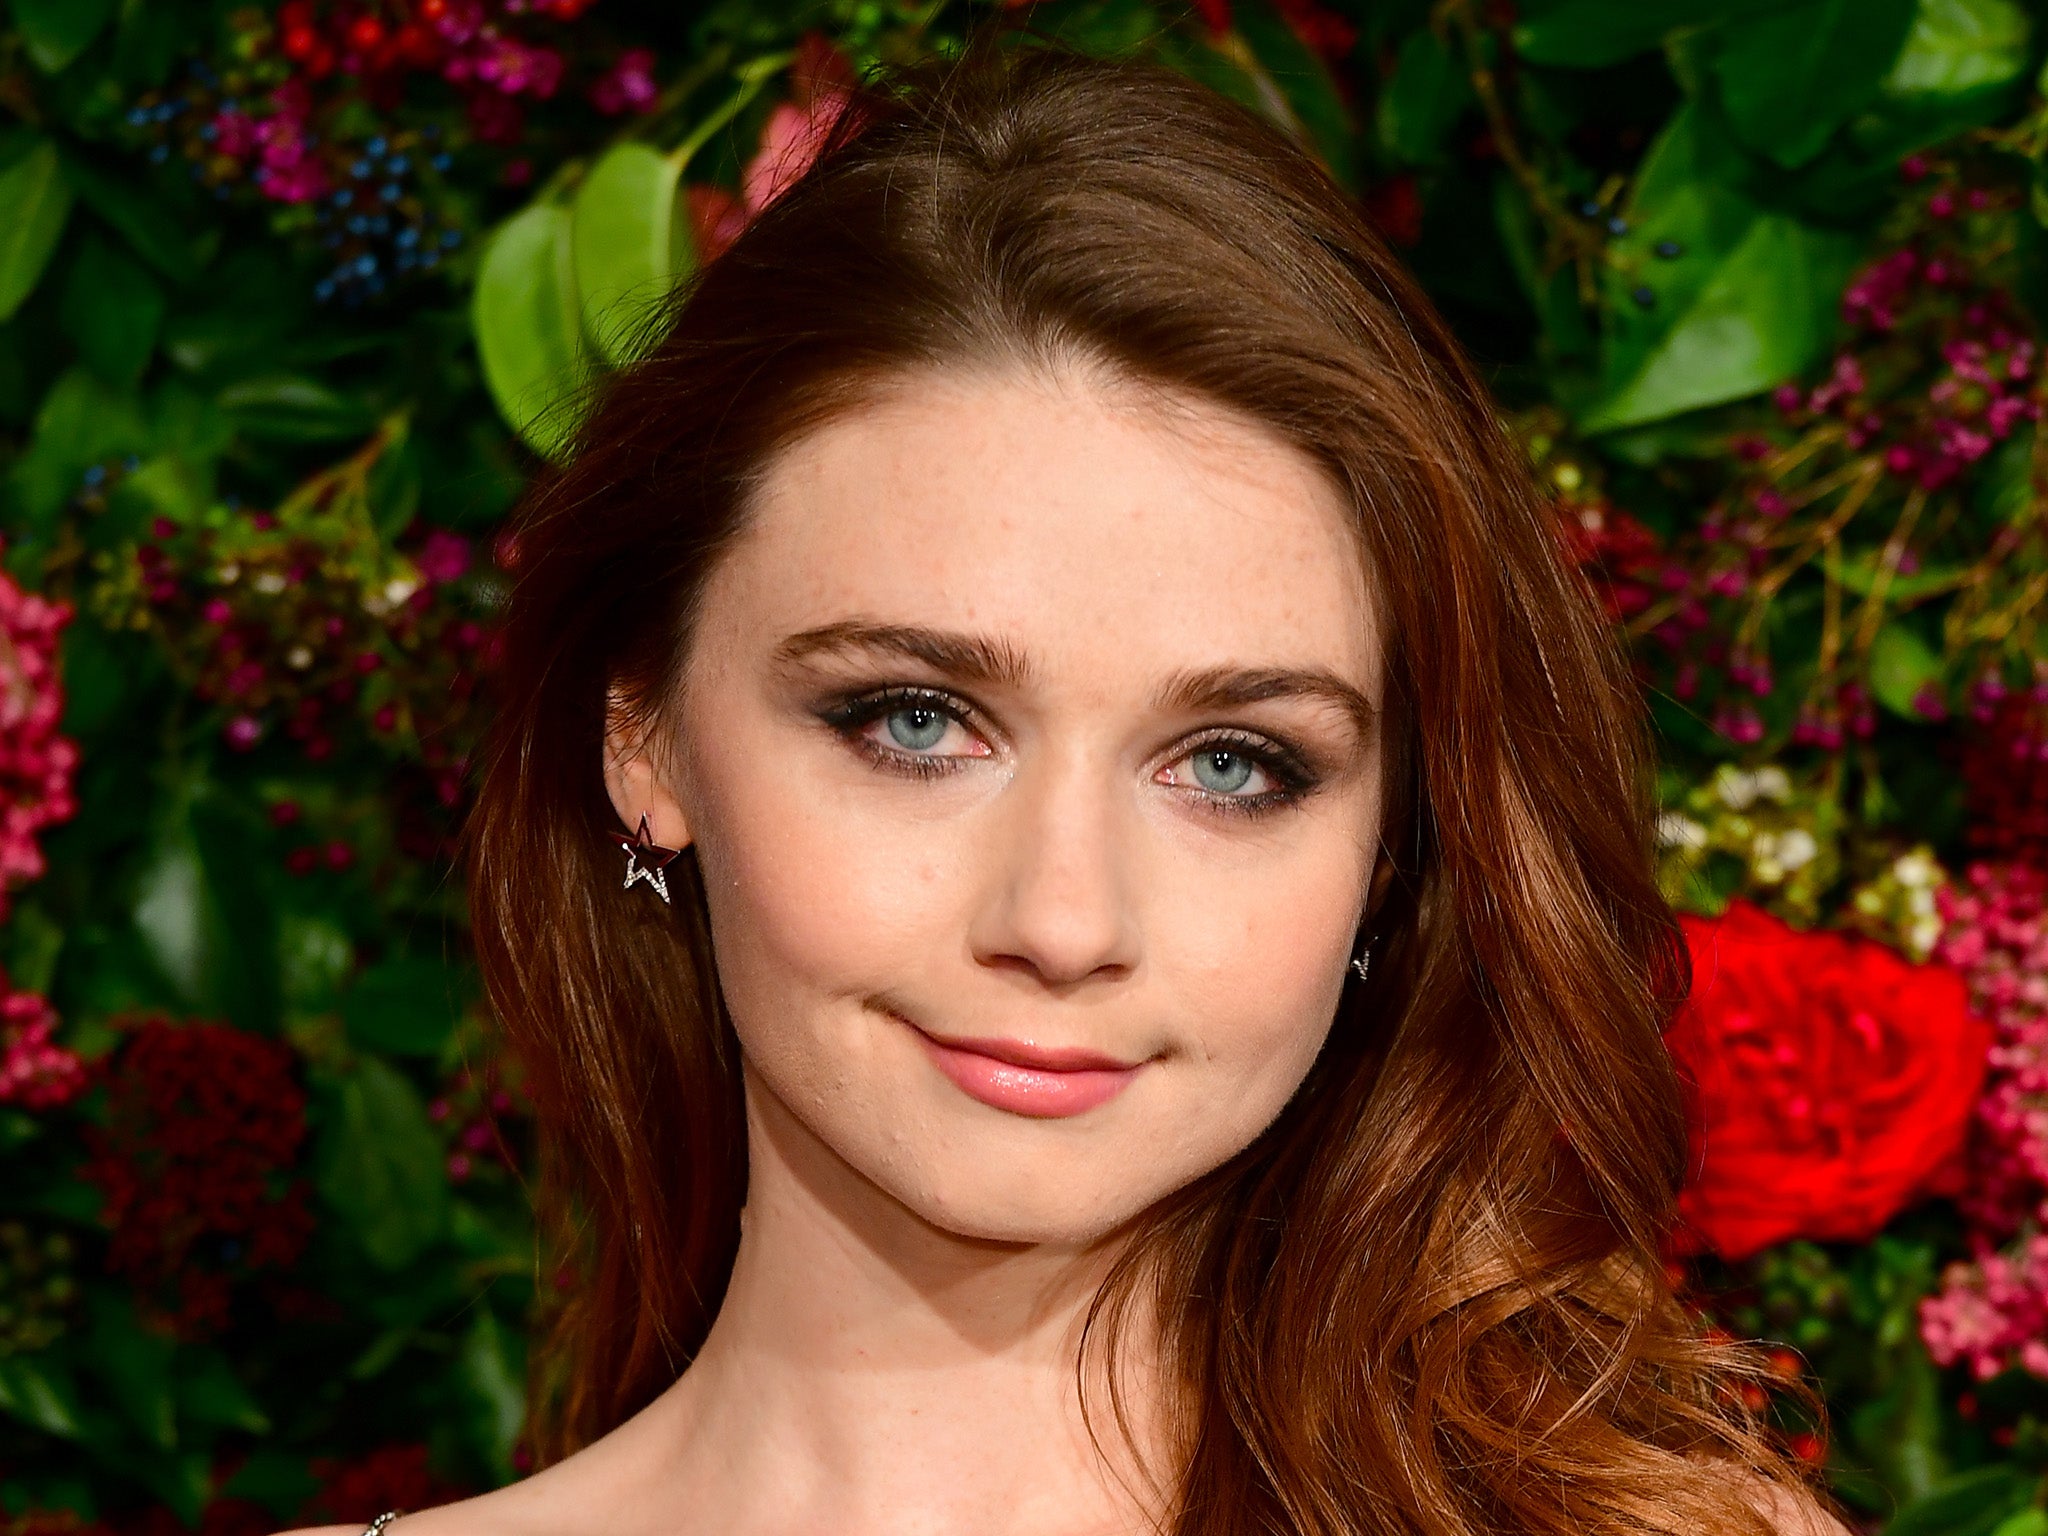 Jessica Barden Wiki, Bio, Age, Net Worth, and Other Facts